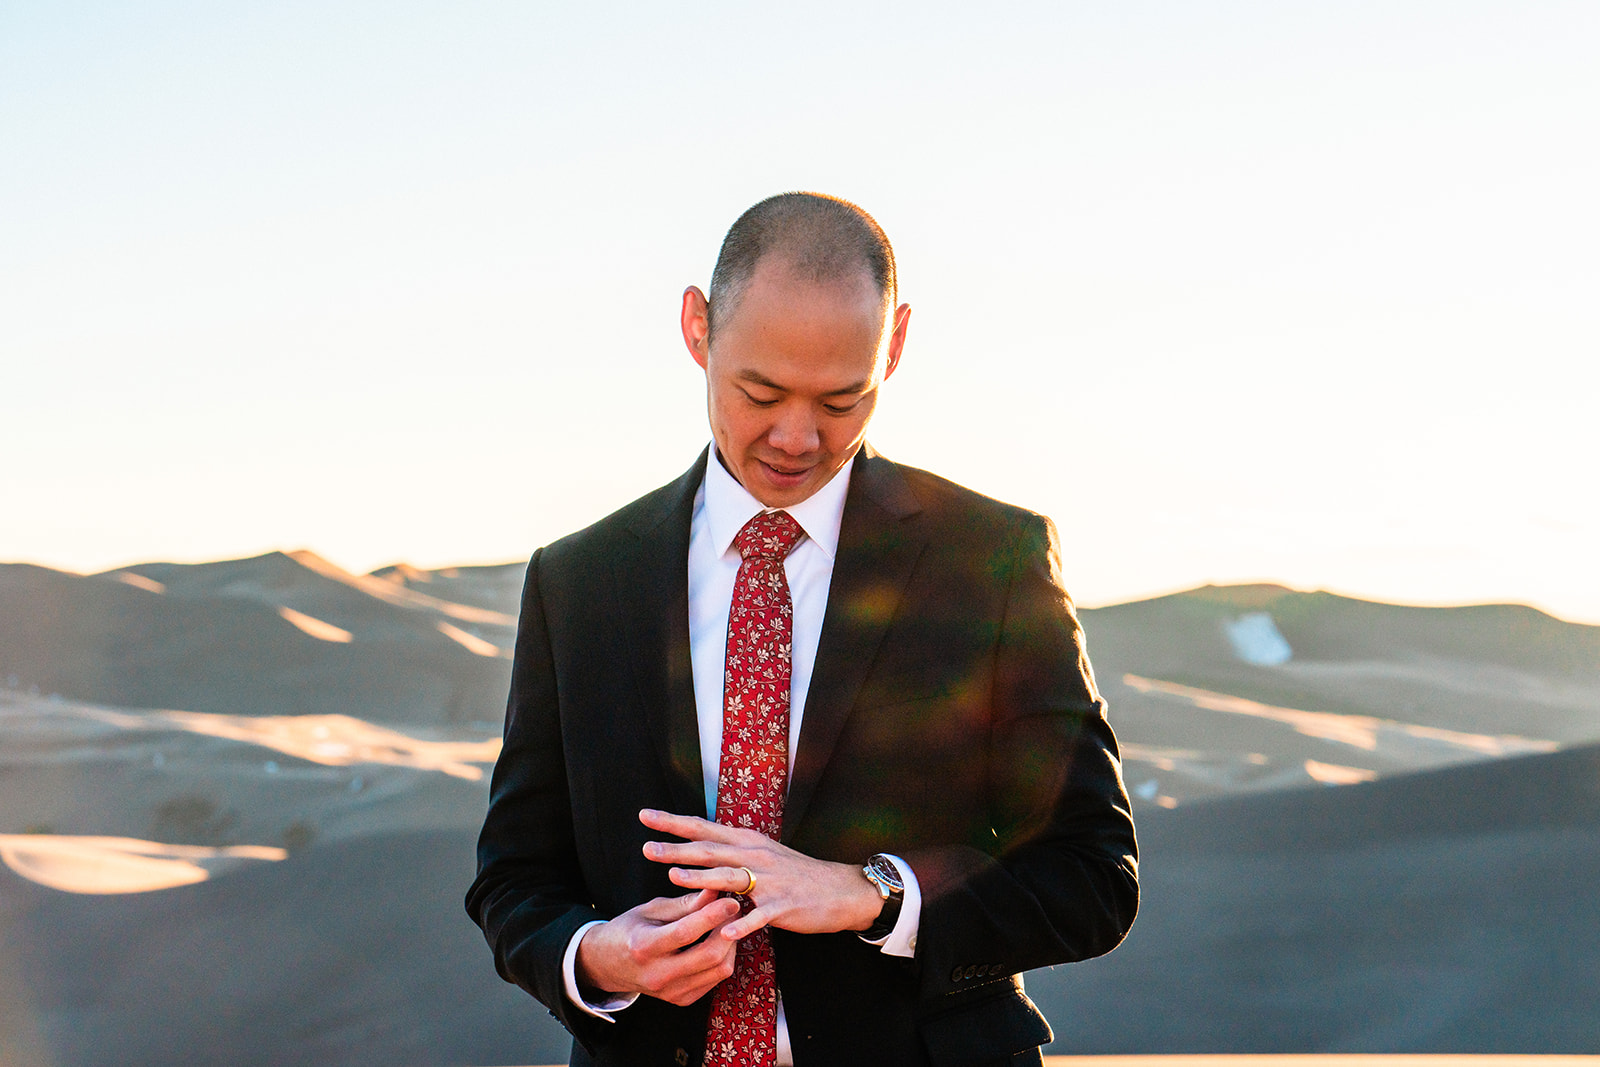 A groom in a suit checking his watch in the desert.